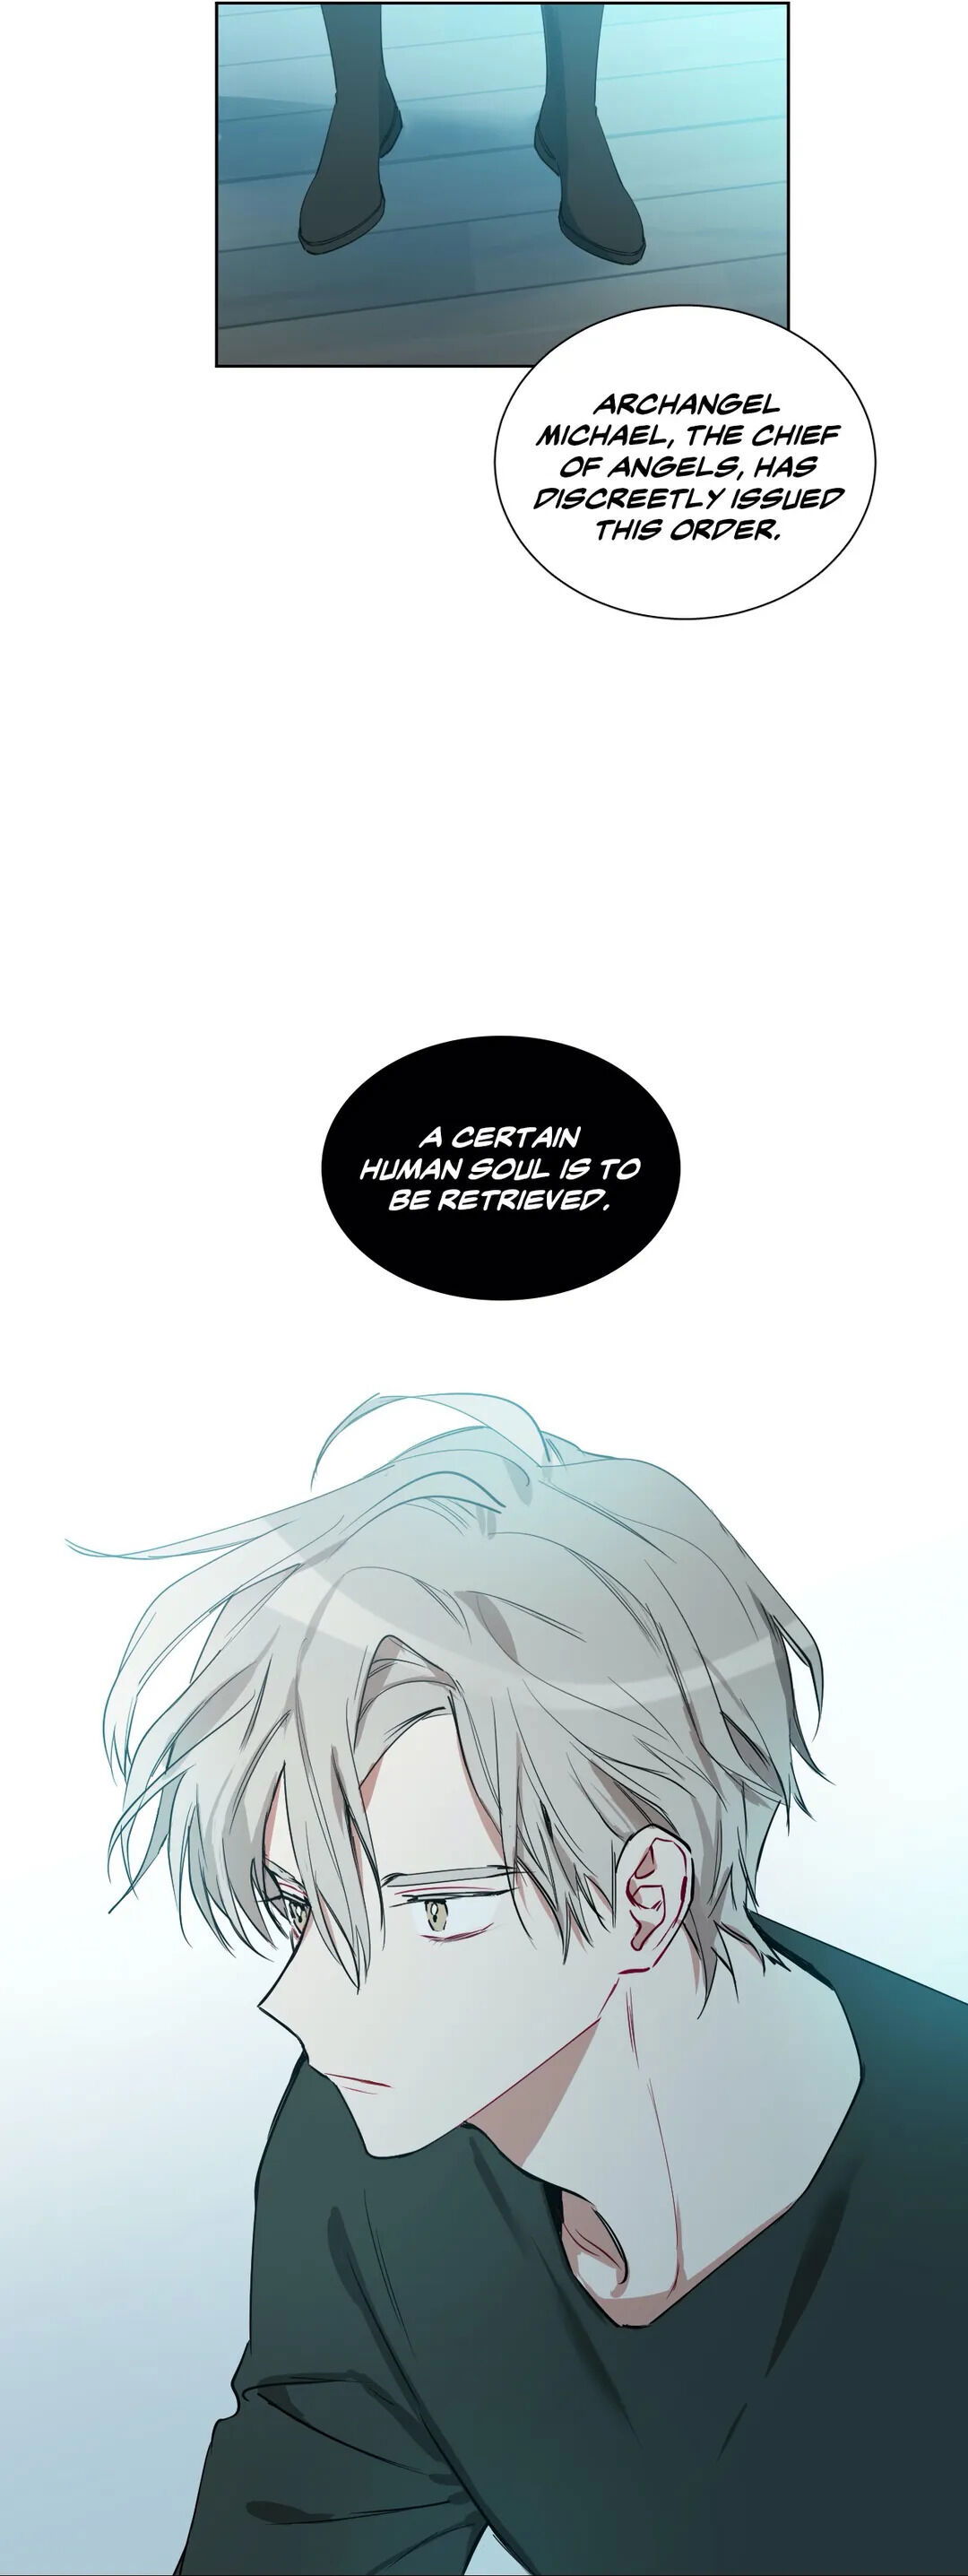 how-to-use-an-angel-chap-31-8